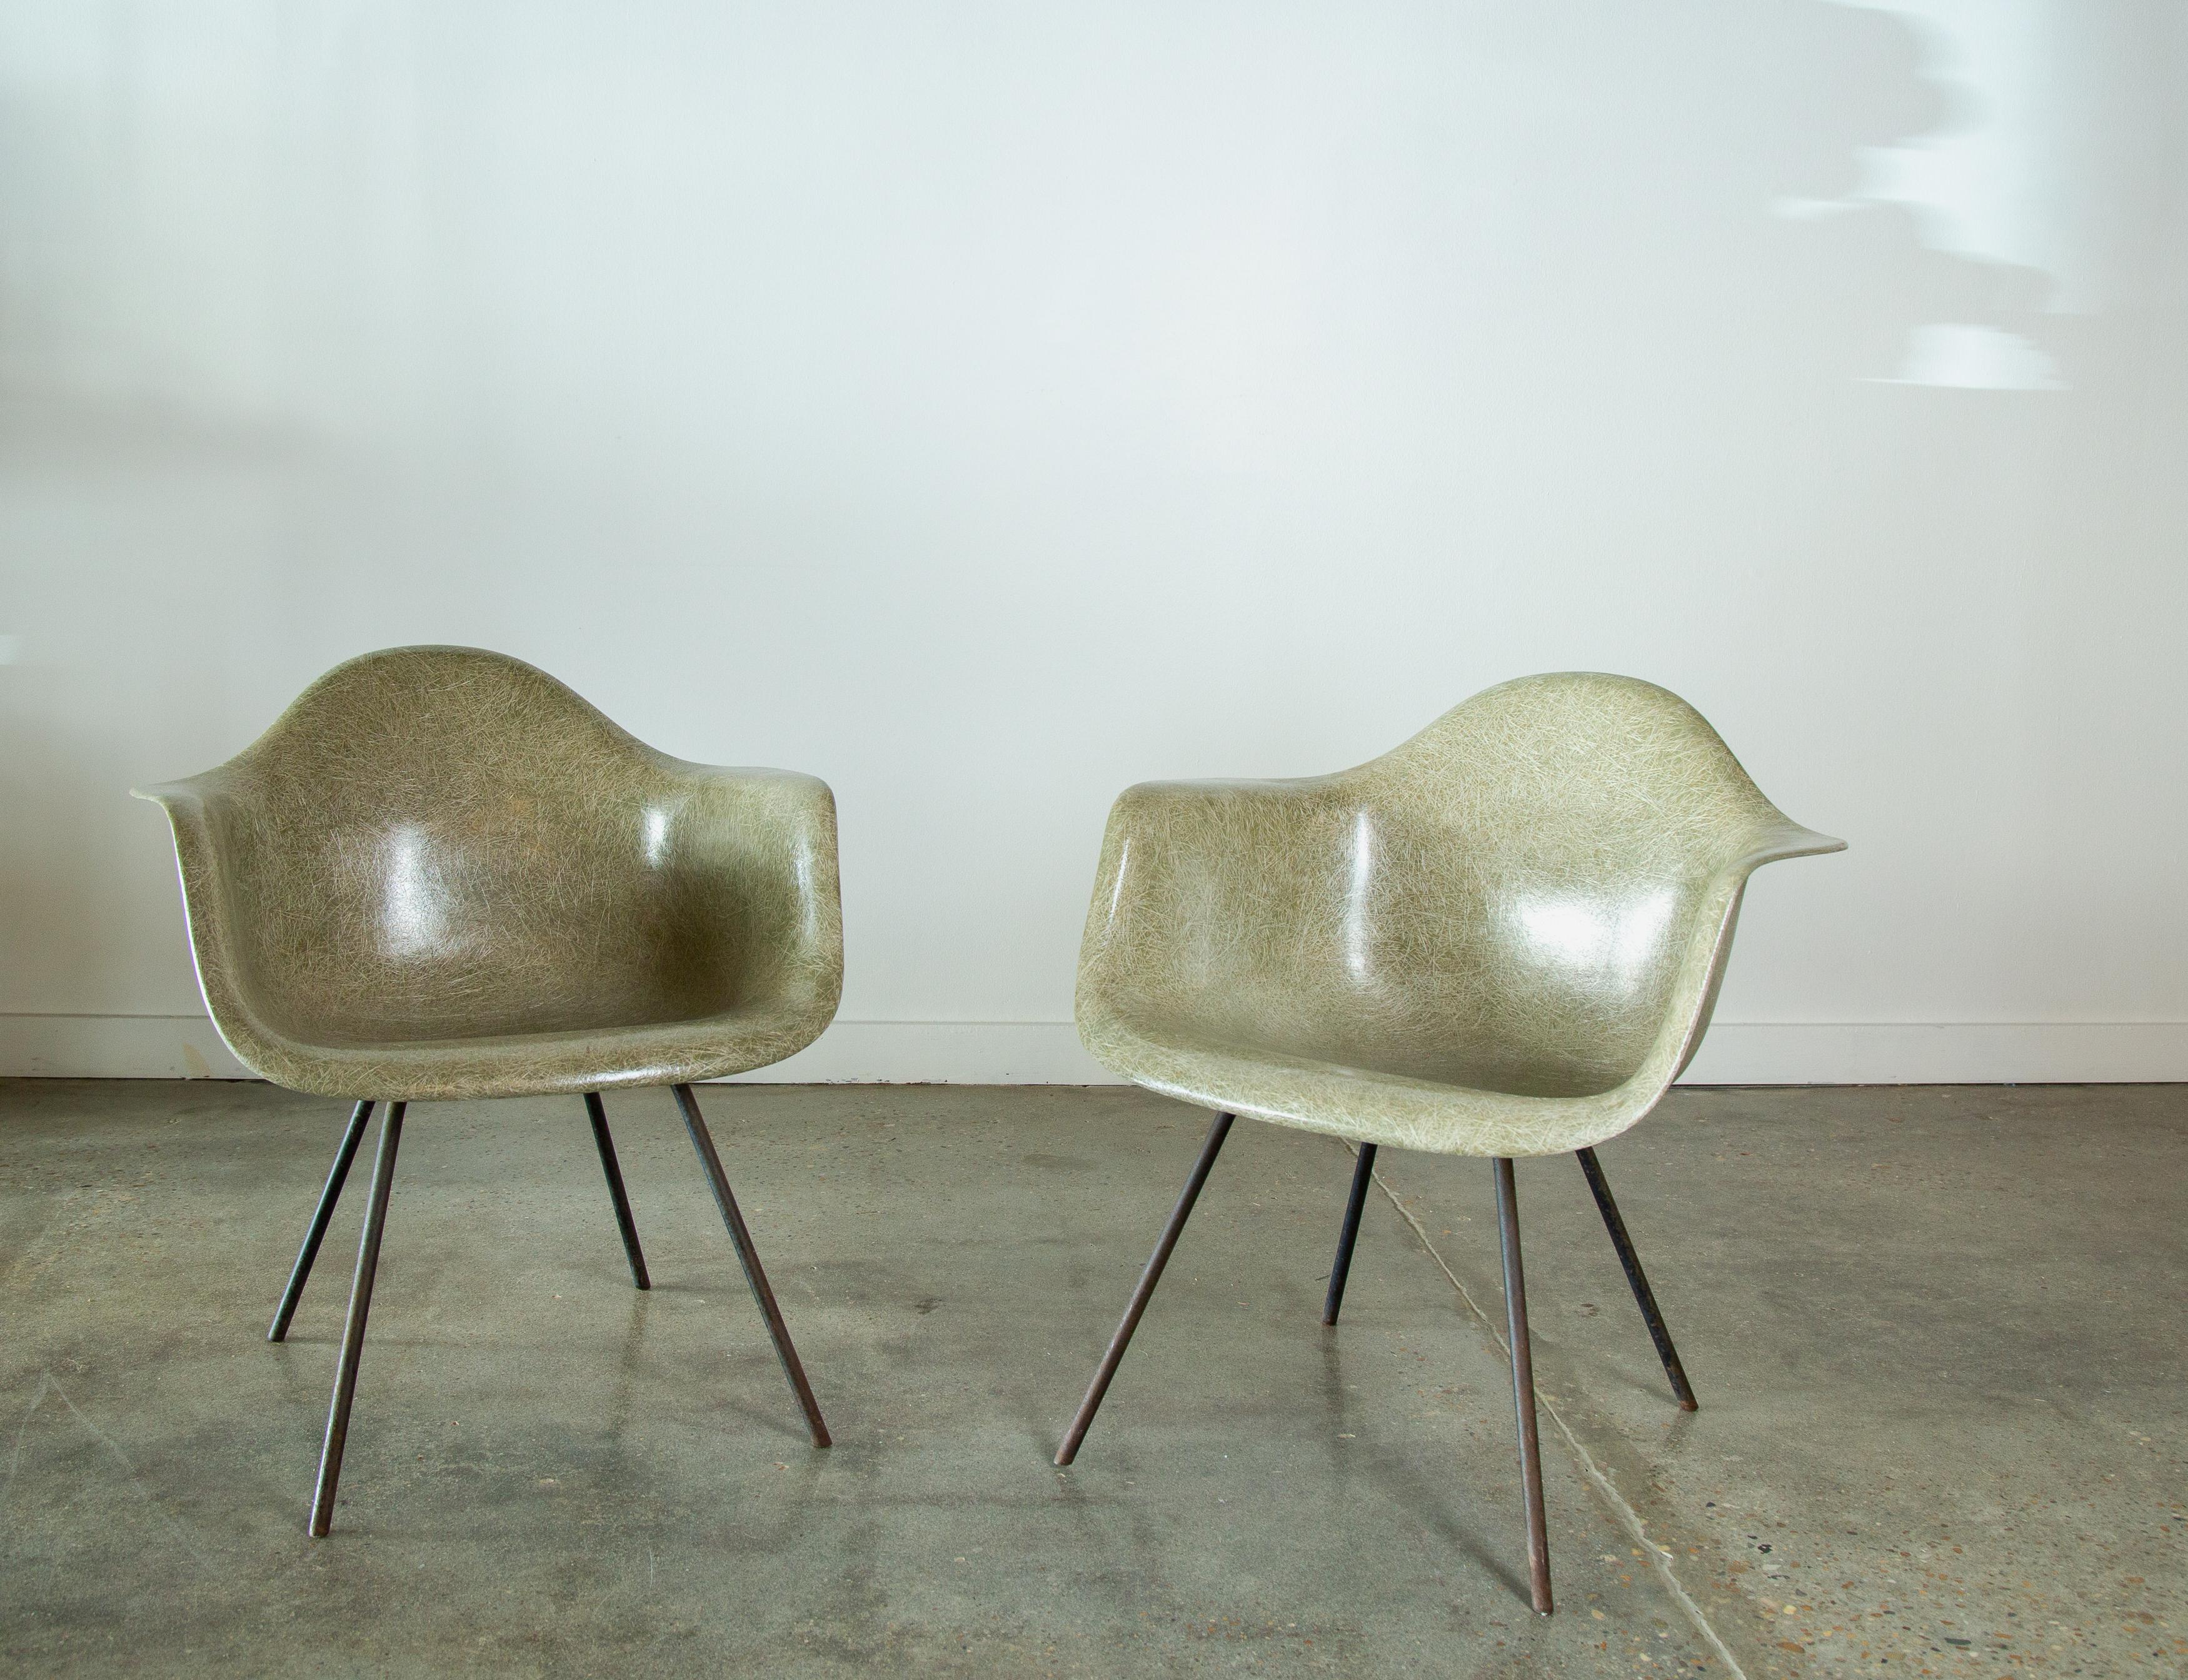 Seafoam shell armchairs designed by Charles and Ray Eames for Herman Miller.  These chairs with 3 dots marked on the bottom of the chair (see last photo) signify 3M manufacturing and date to around 1953.  The fiberglass shows high fiber texturing